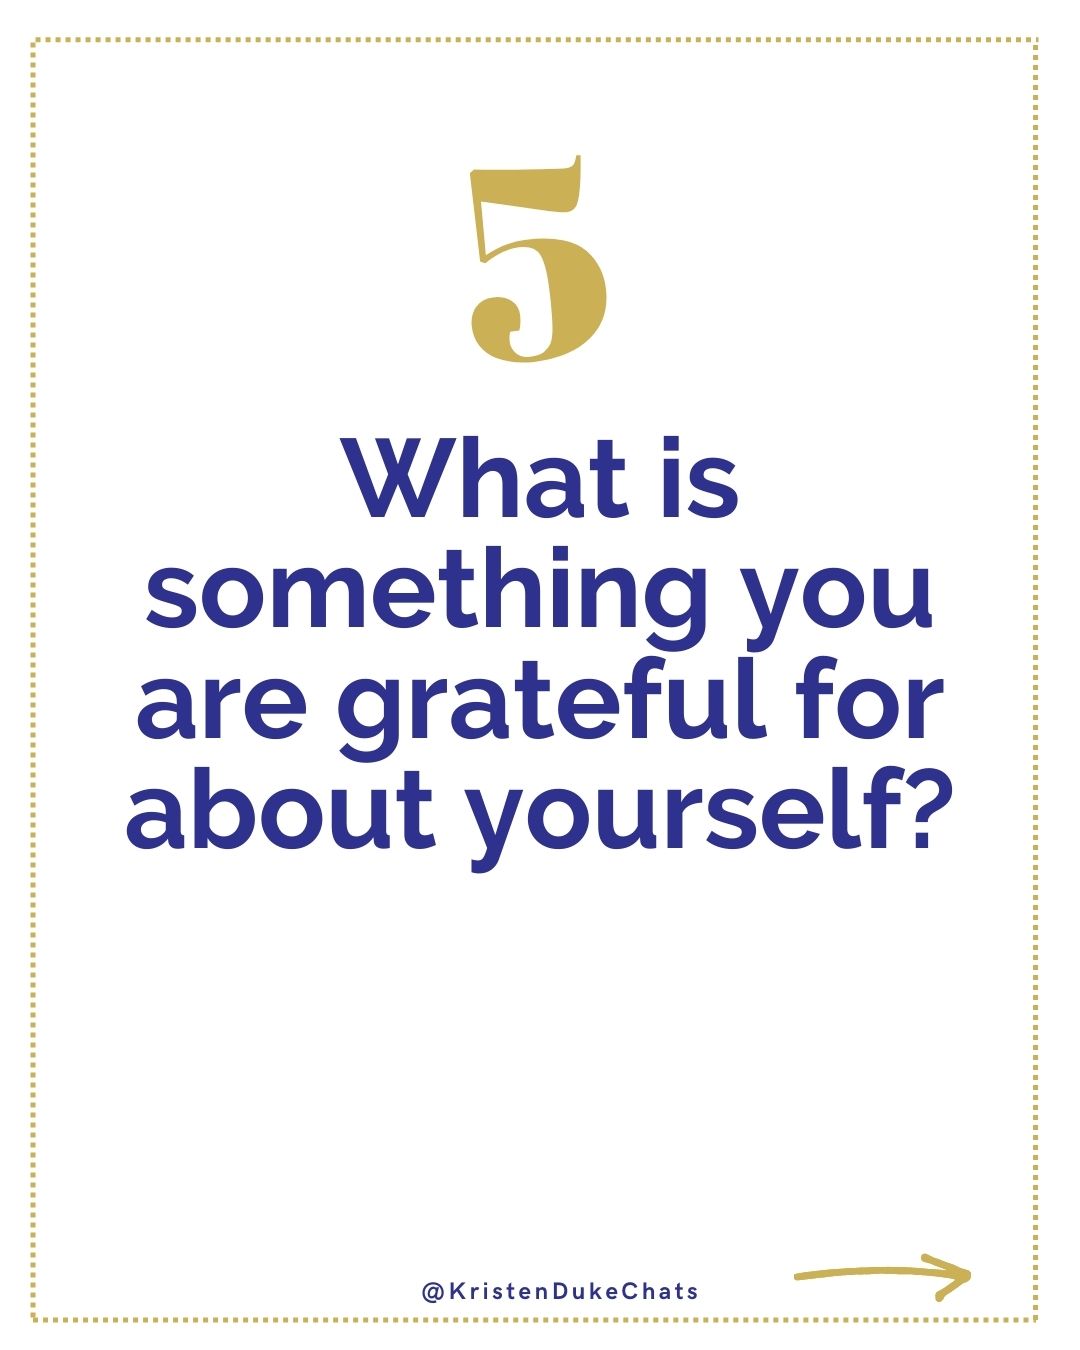 15 questions to ask your teens at the Thanksgiving table besides "what are you thankful for?"